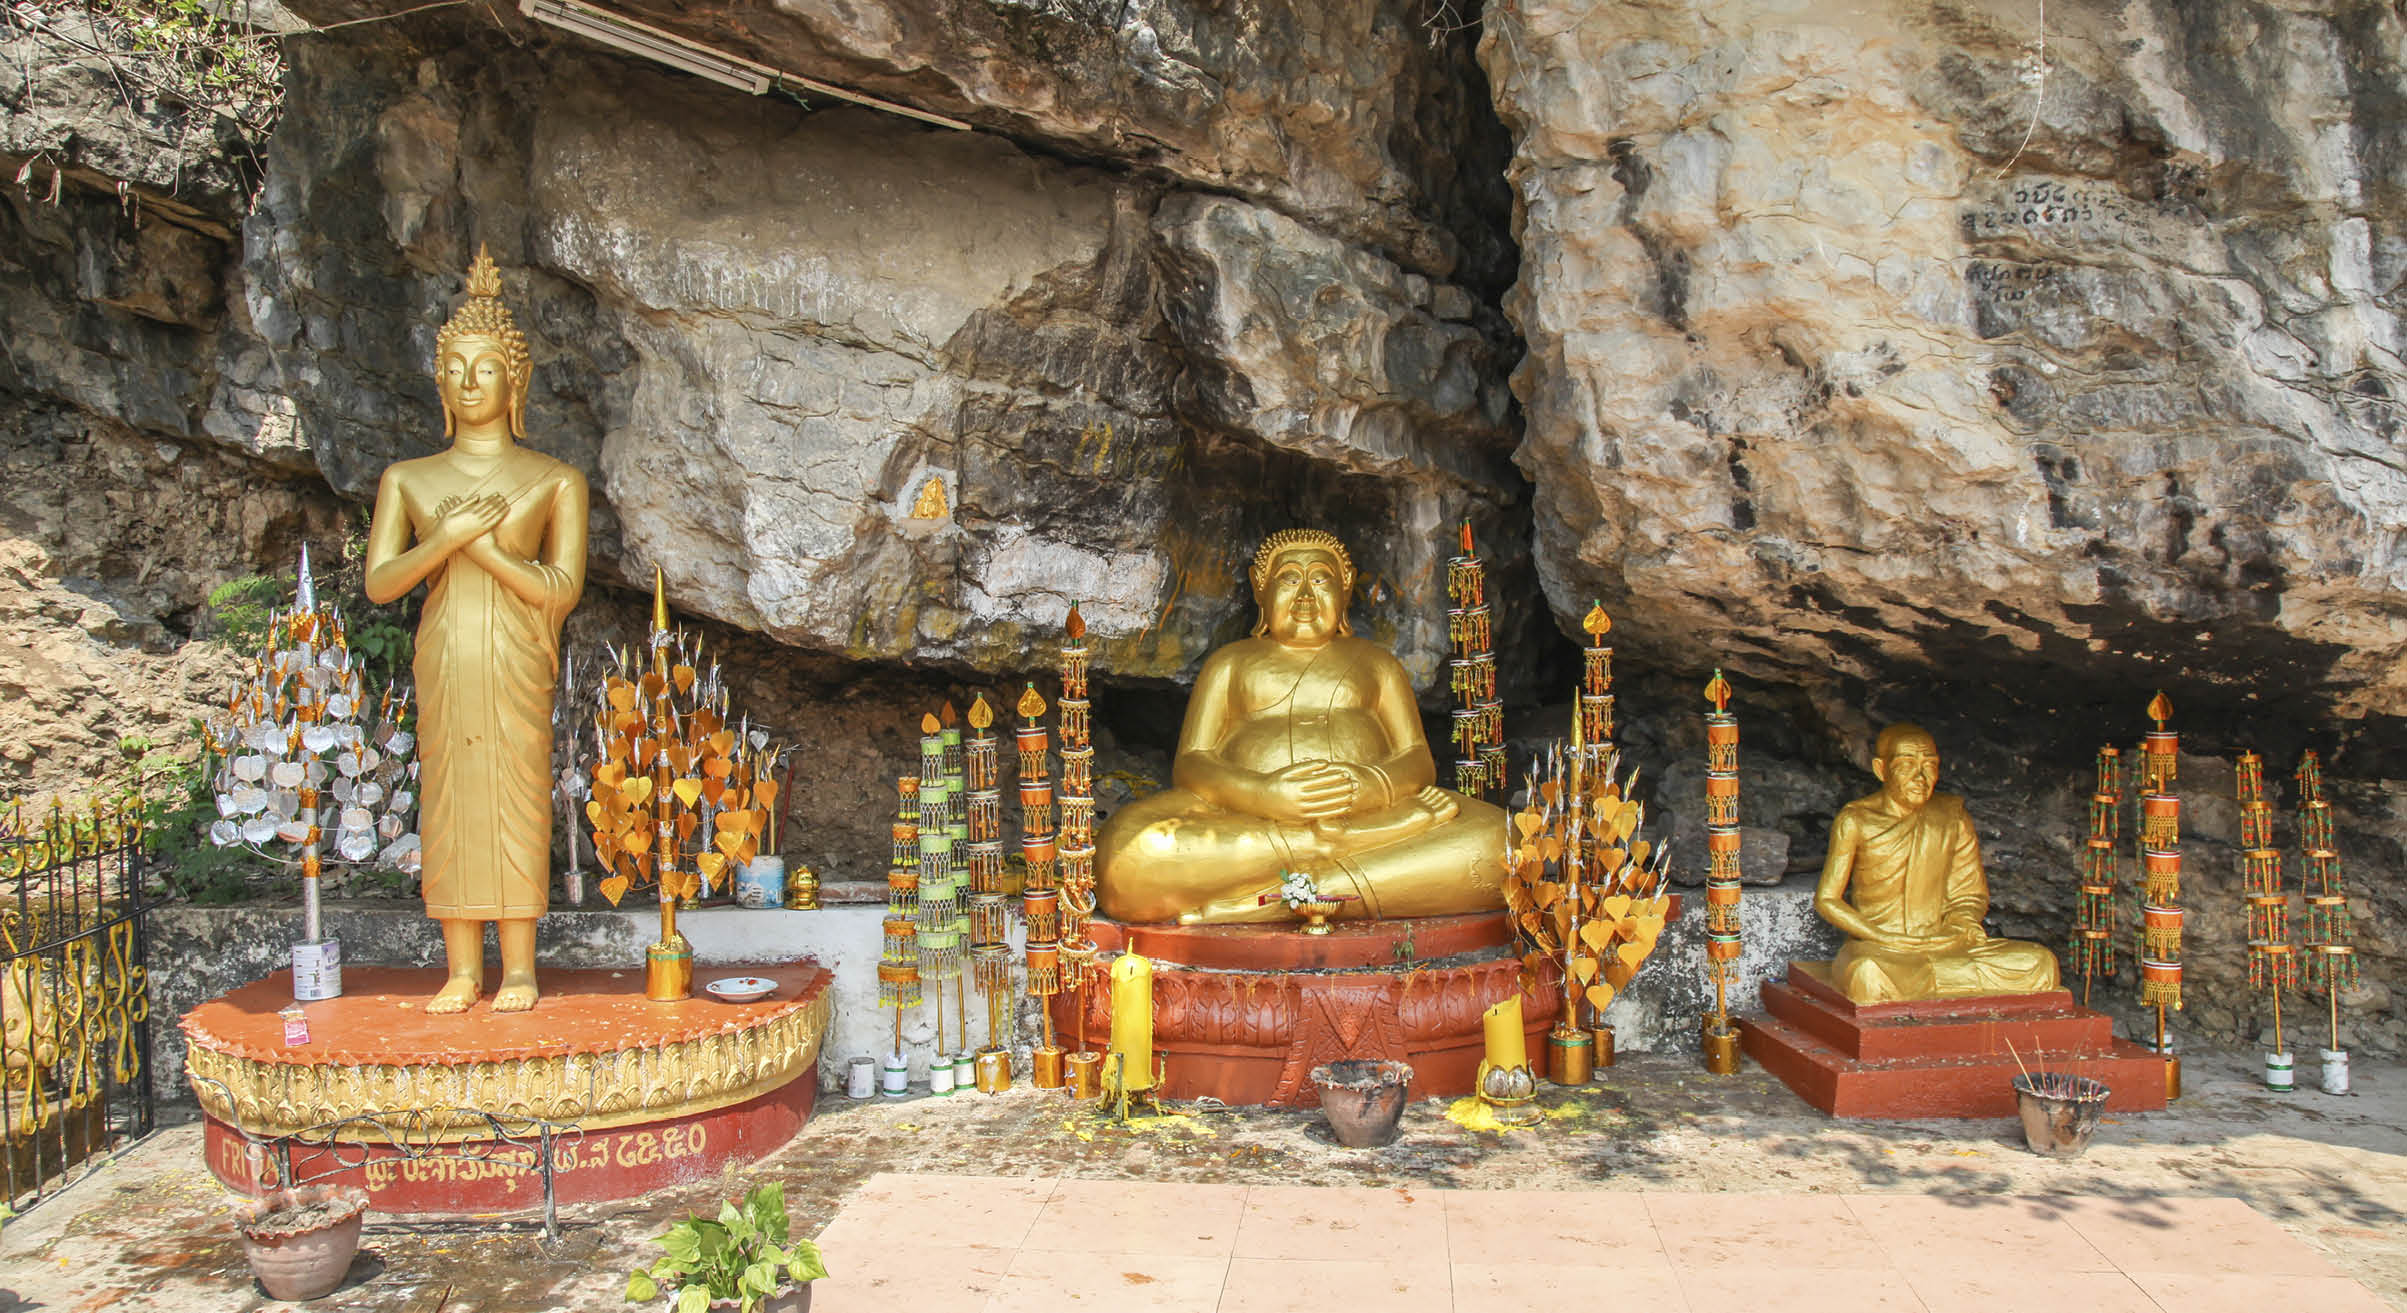 Golden buddha statues in a shrine on Mount Phousi in Laung Prabang - Laos